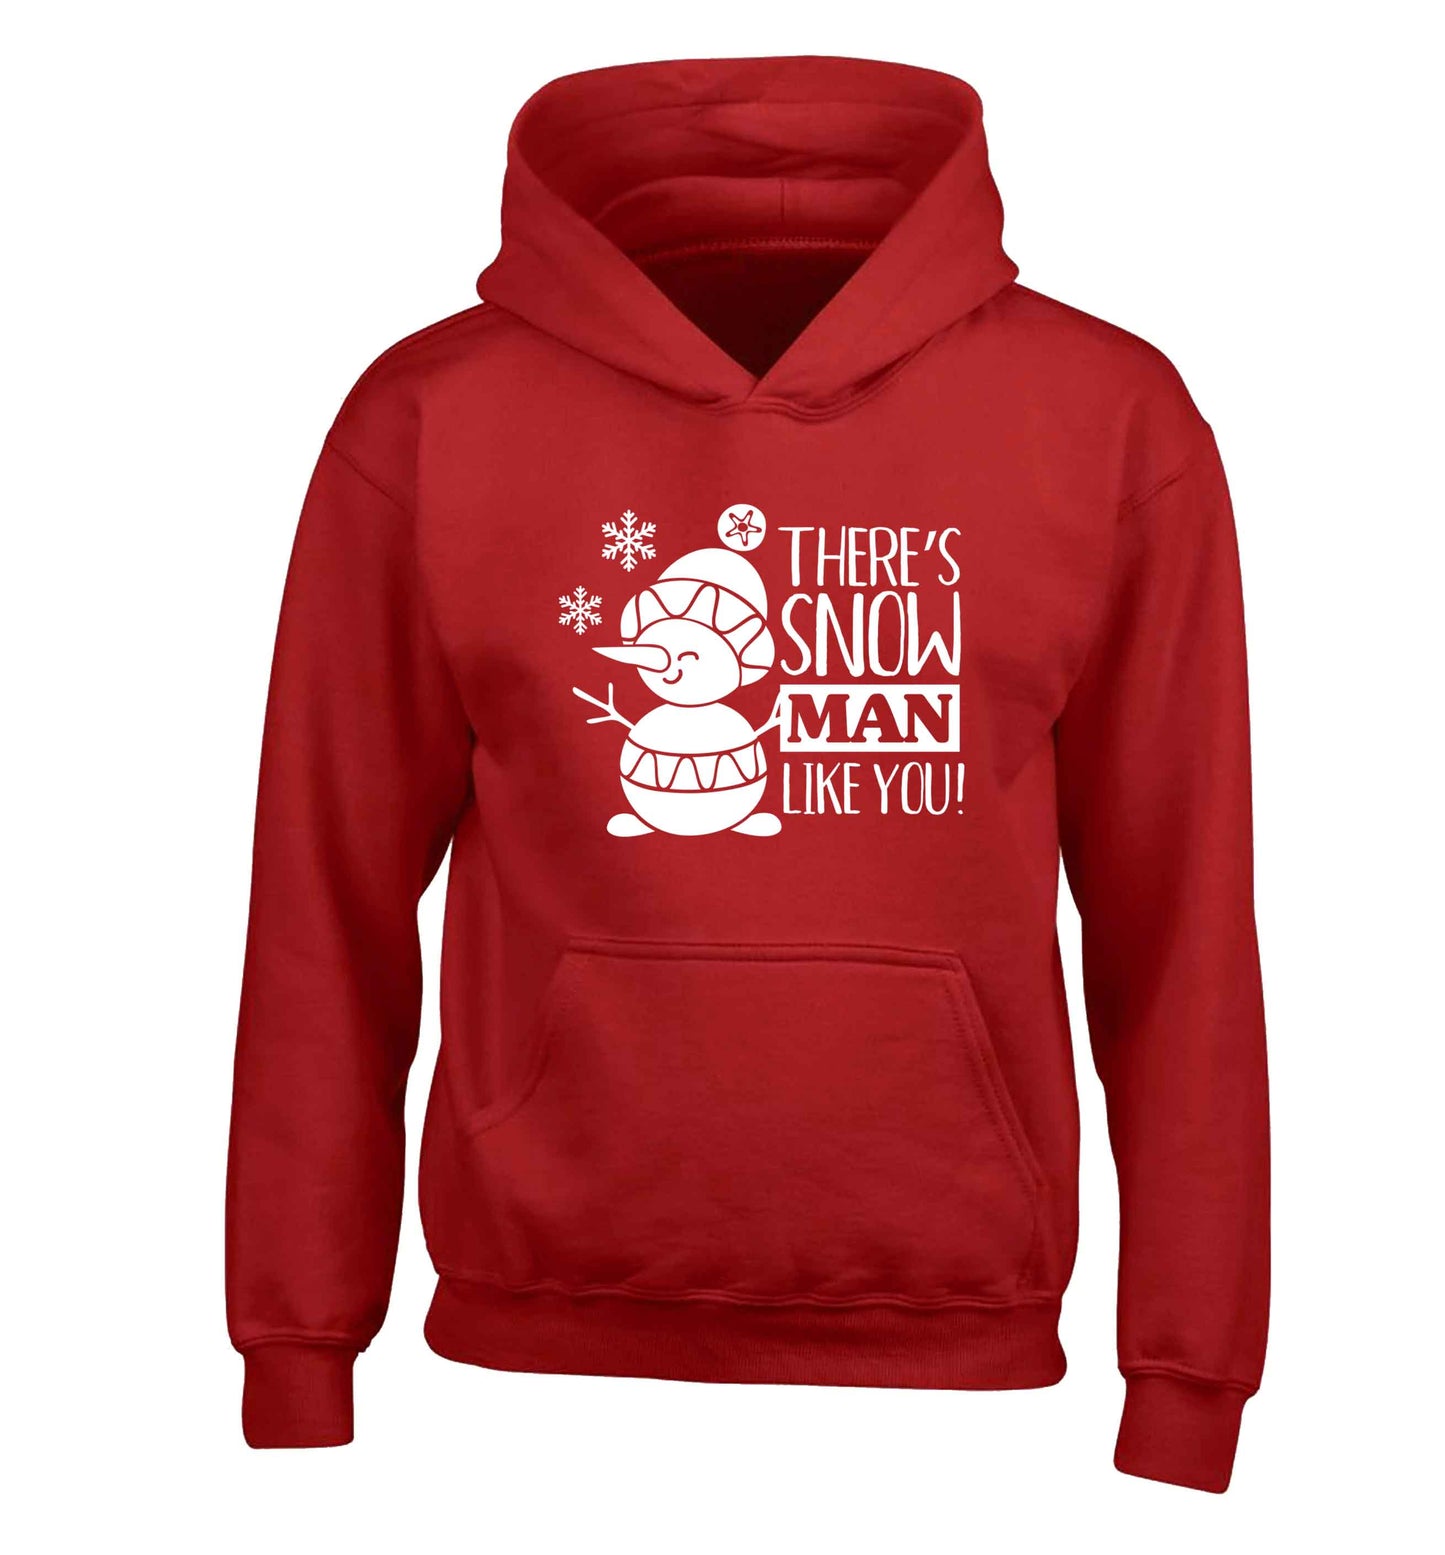 There's snow man like you children's red hoodie 12-13 Years